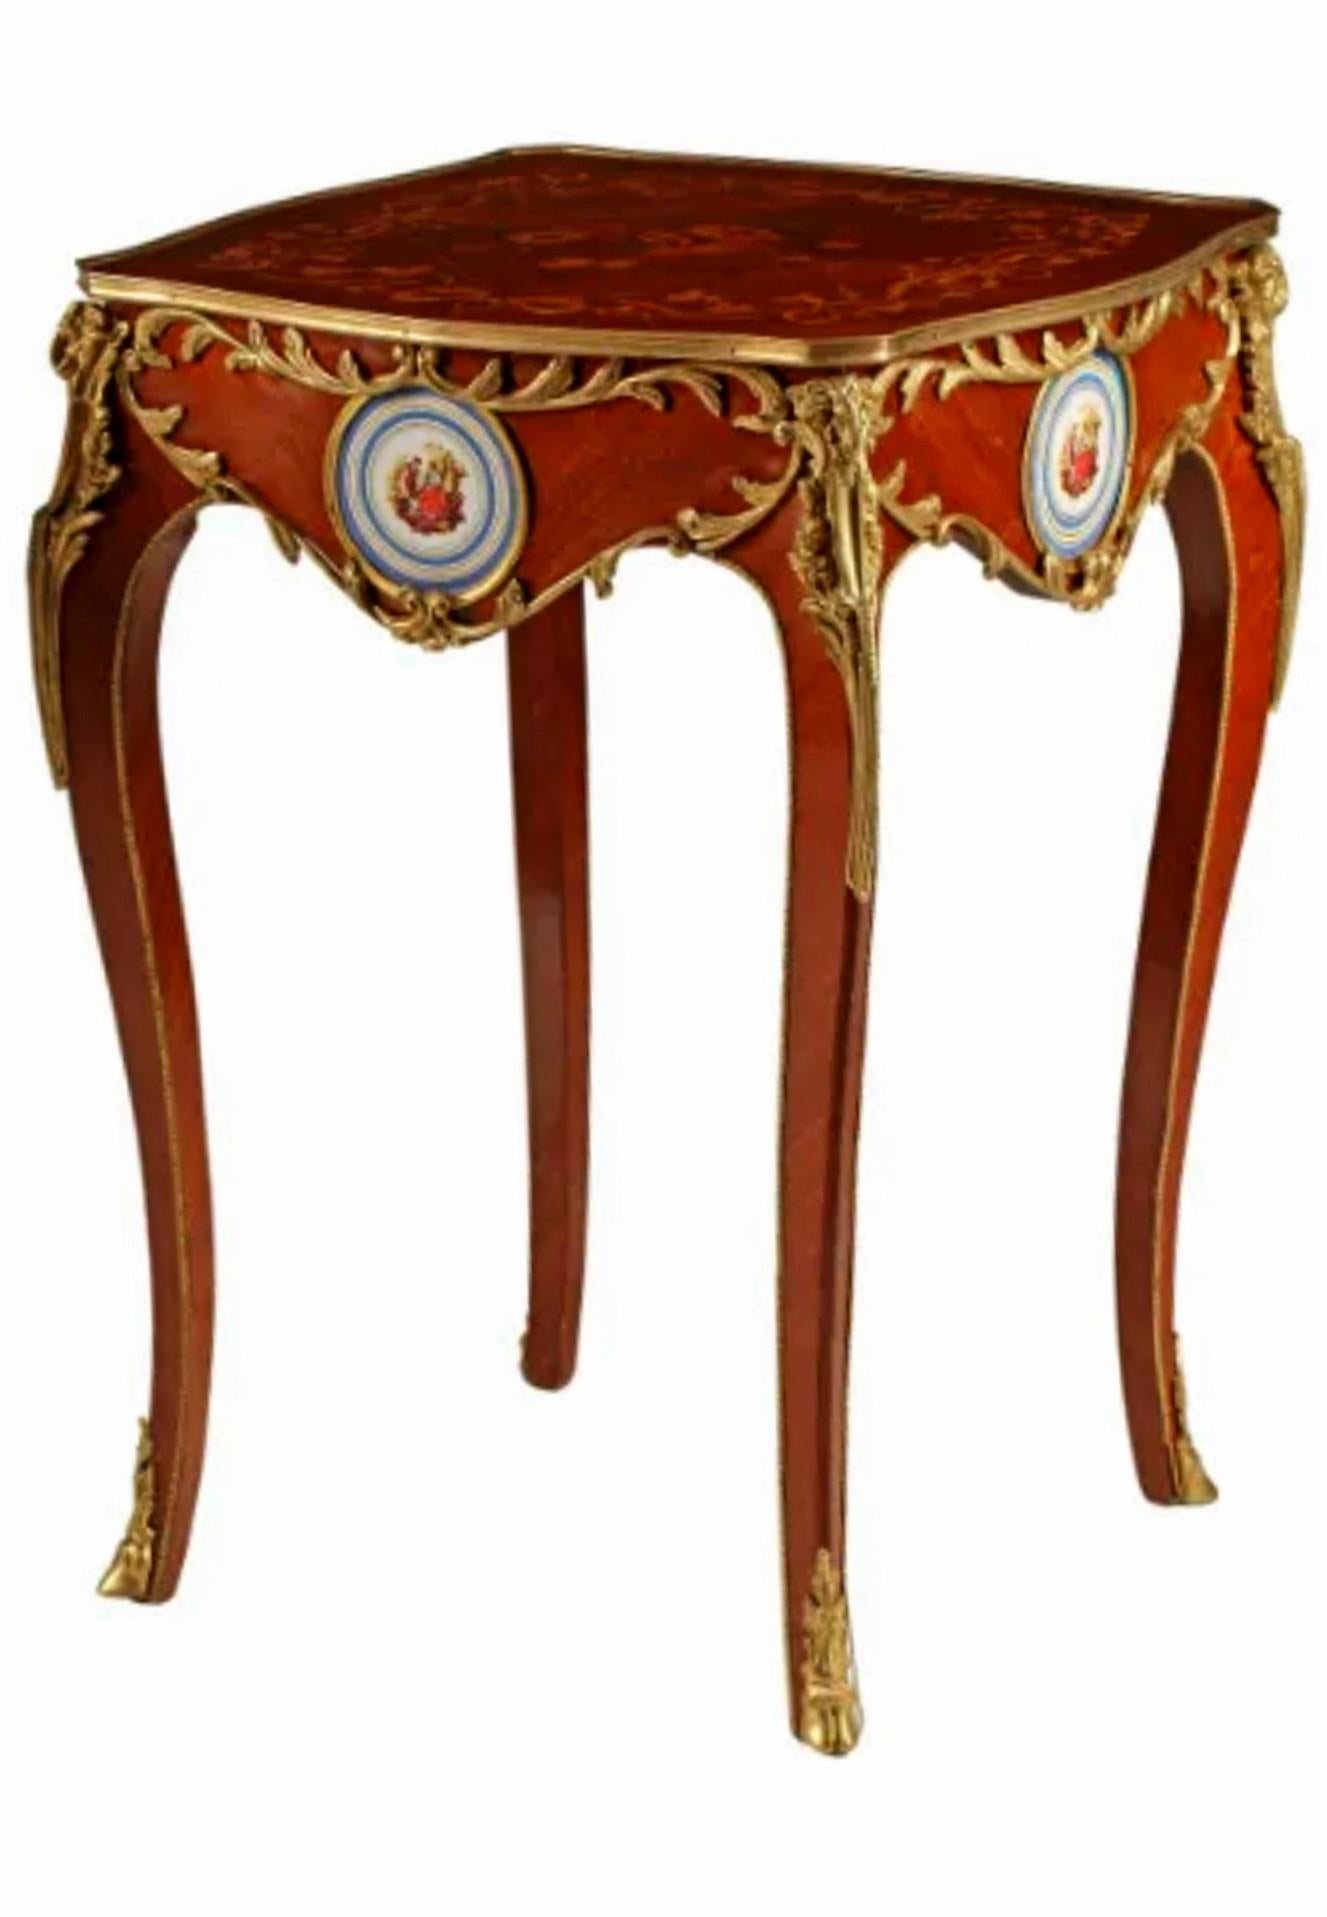 Fine French Louis XV Style Gilt Bronze Porcelain Side Table Pair In Good Condition For Sale In Forney, TX